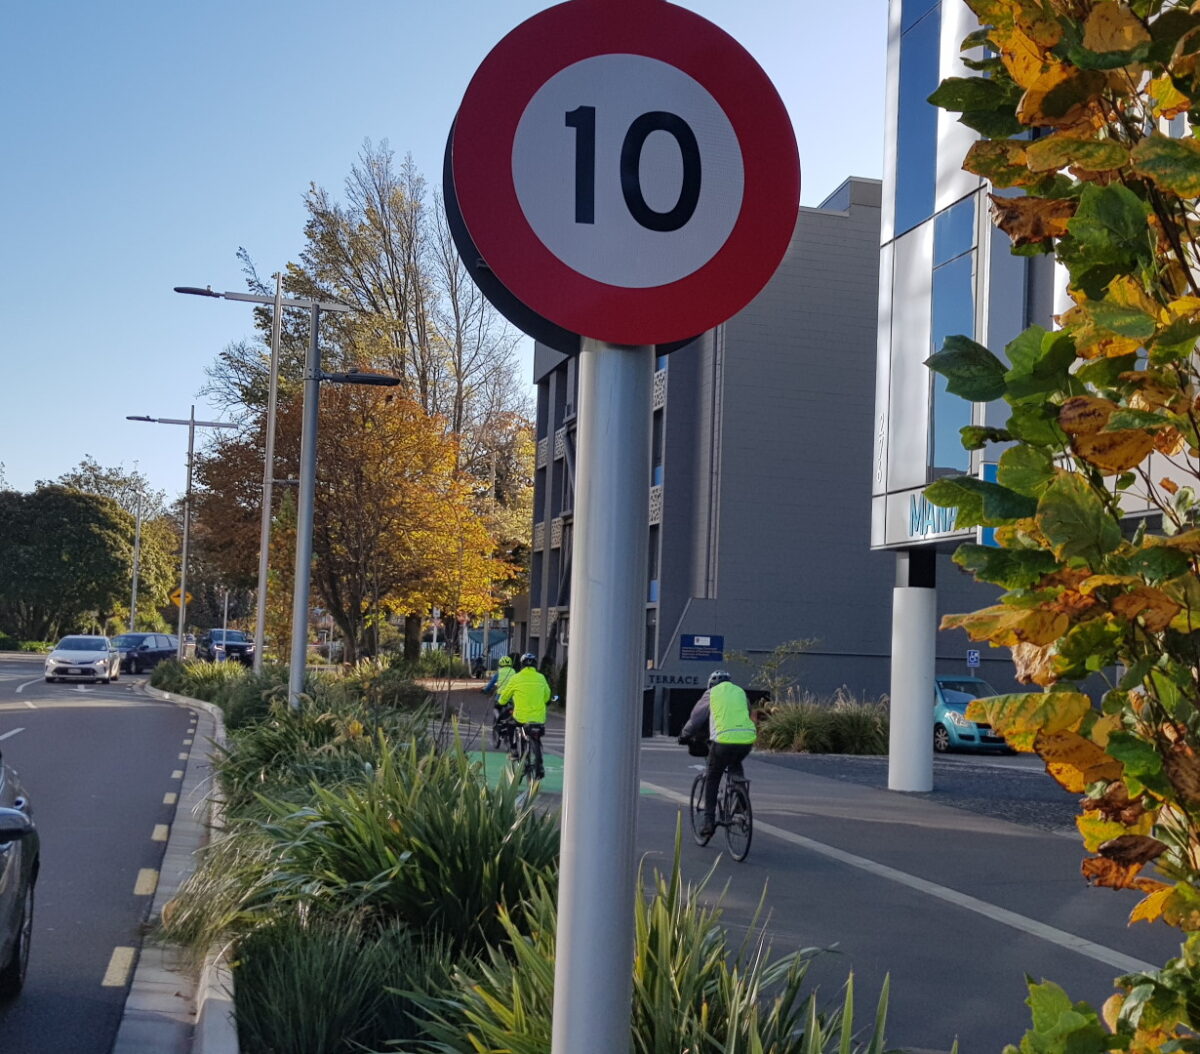 10 Years of “Cycling in Christchurch” – A Decade of Change…